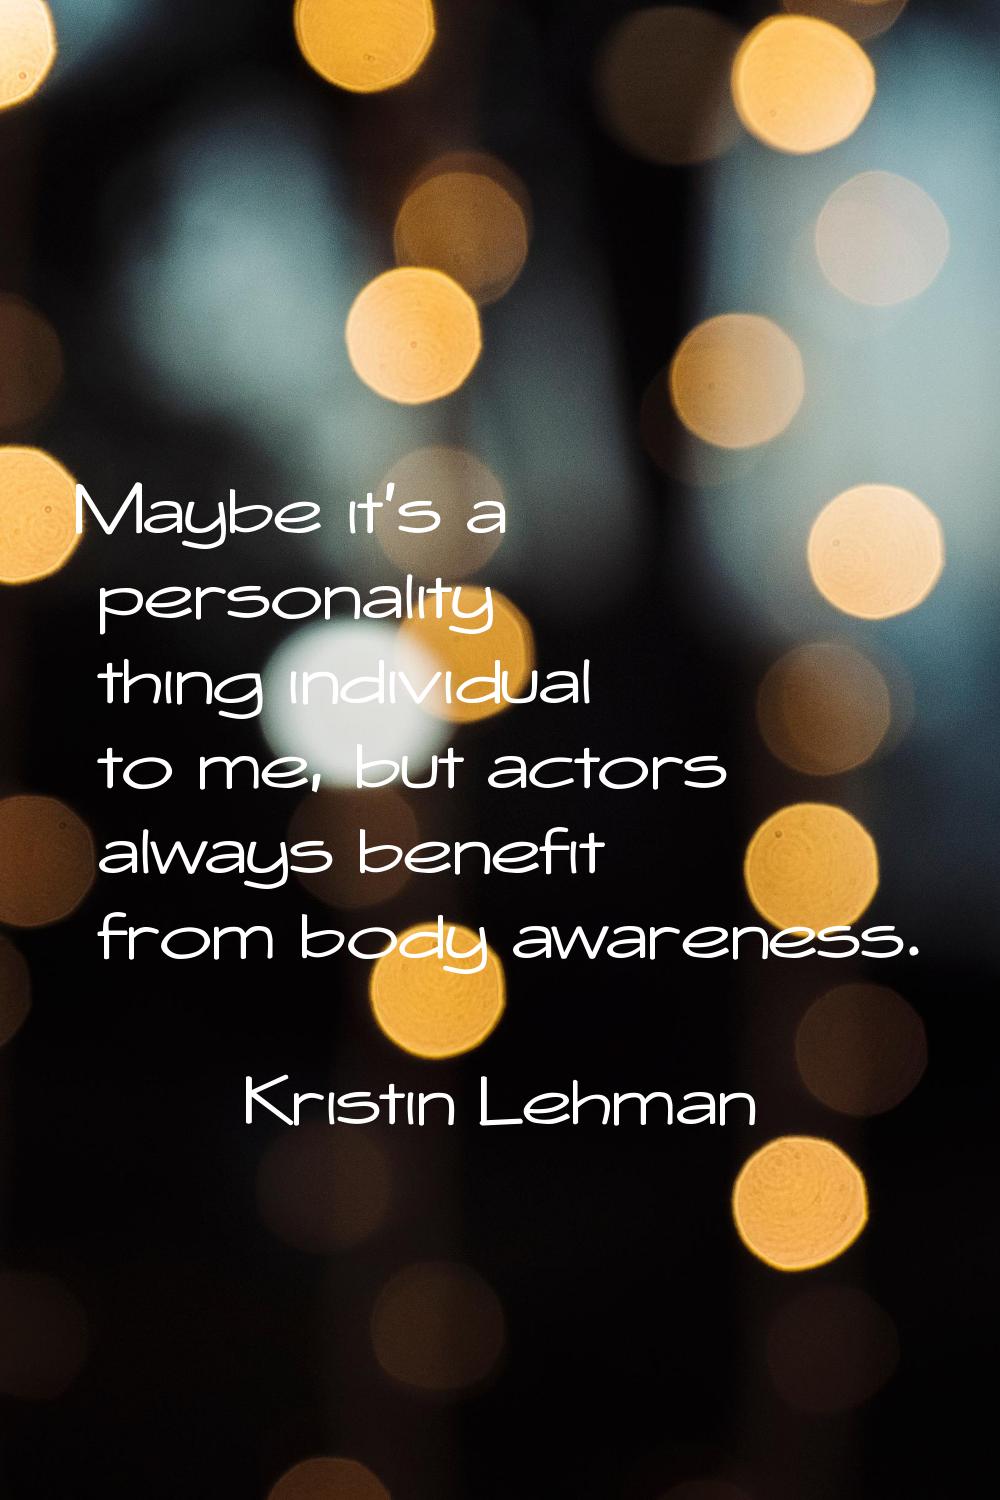 Maybe it's a personality thing individual to me, but actors always benefit from body awareness.